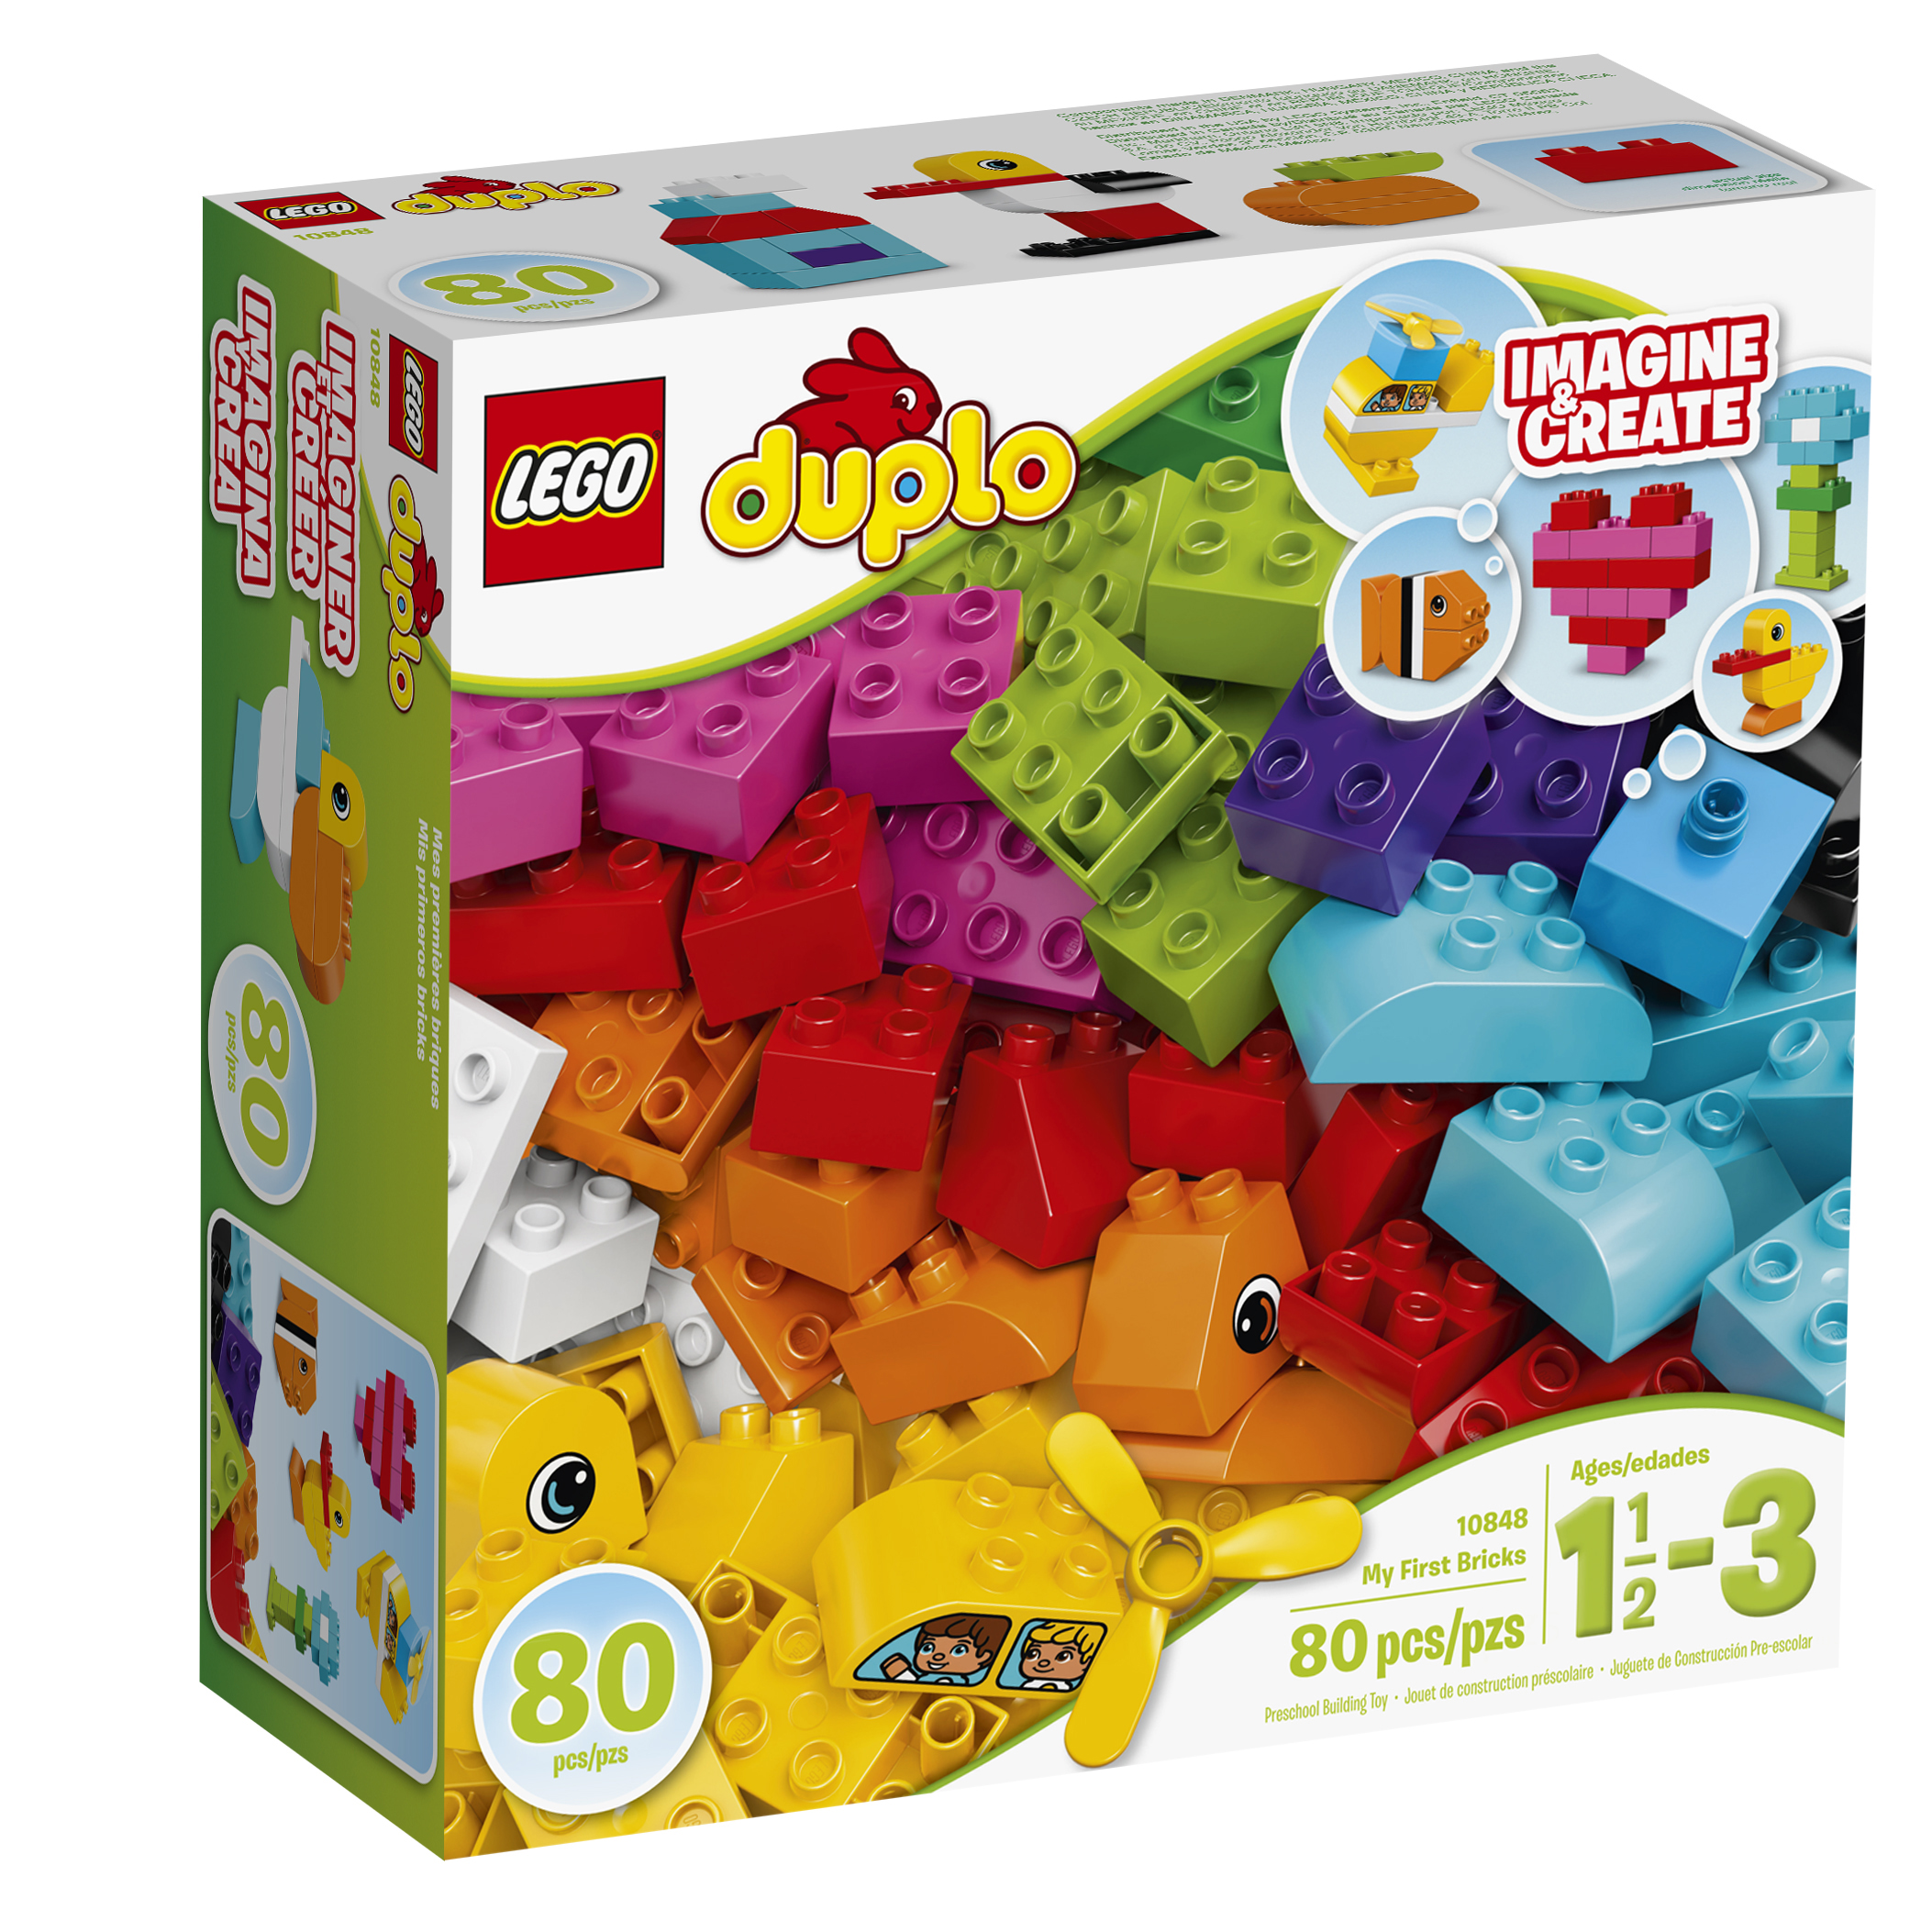 LEGO DUPLO My First Bricks 10848 Building Set (80 Pieces) - image 3 of 6